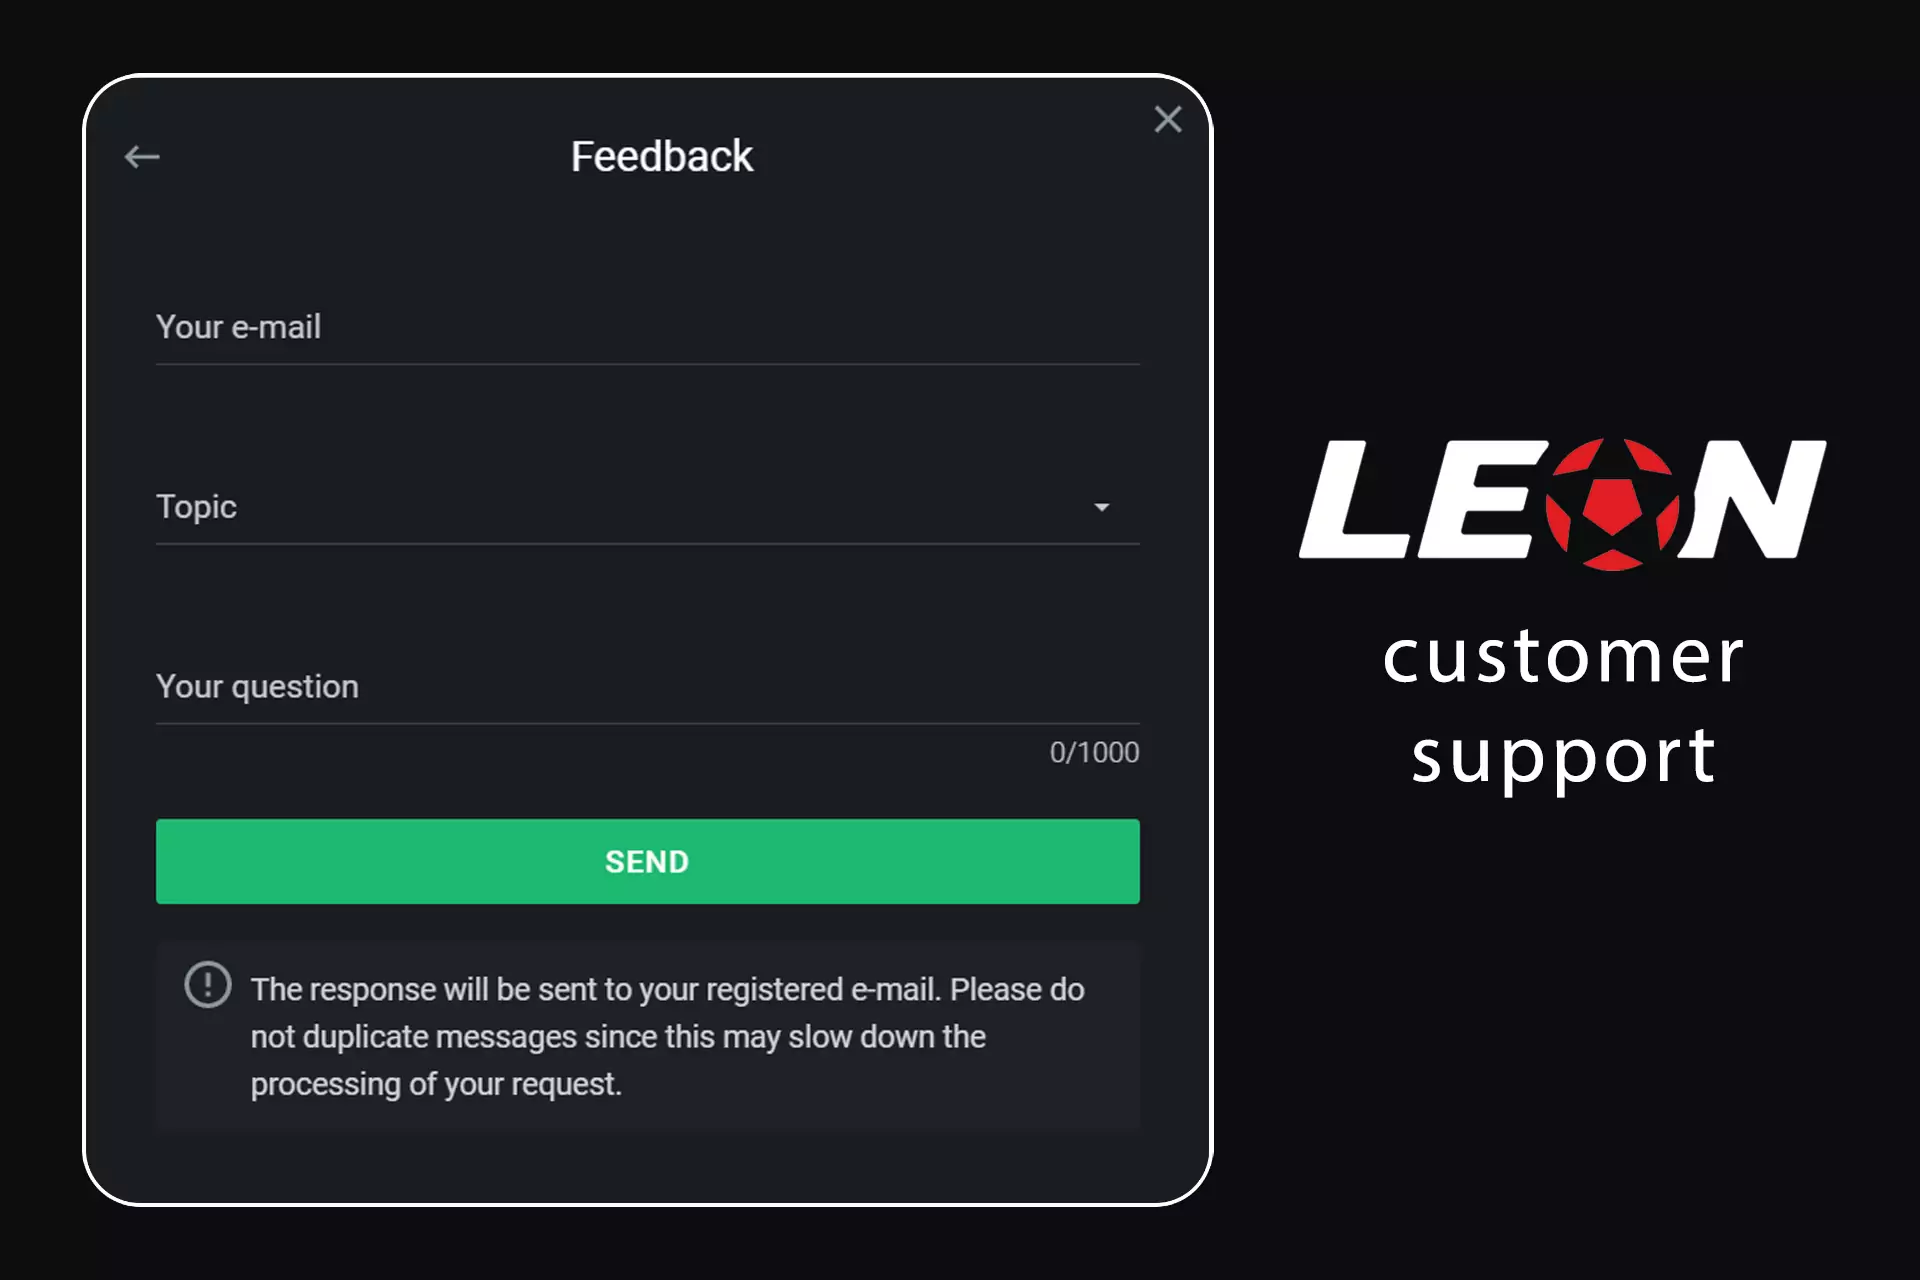 Press the 'Help' button and write to customer service using a form.